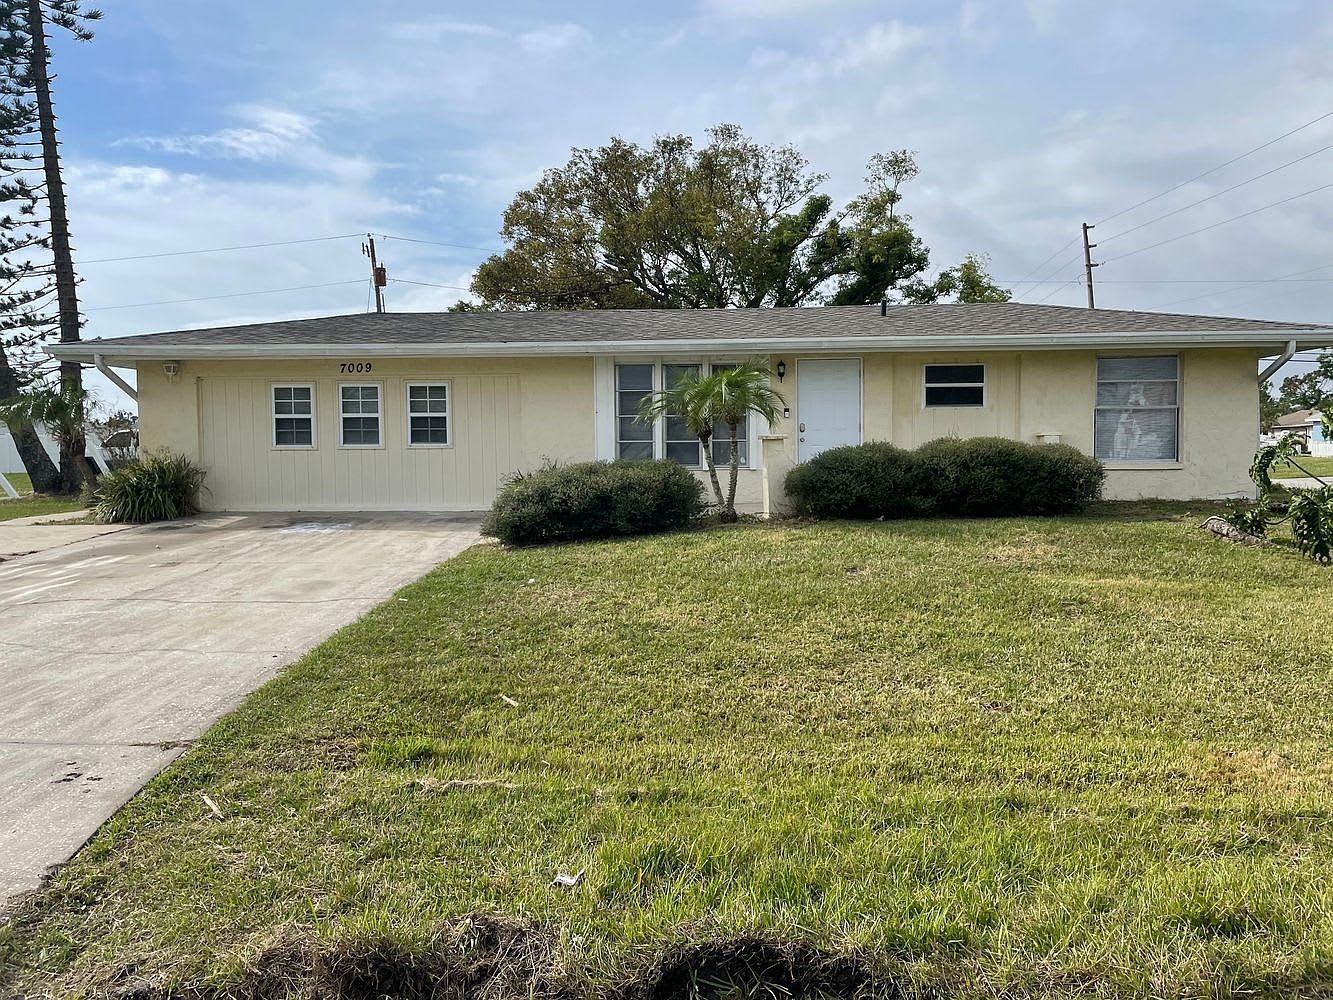 7009 Mamouth St, Englewood, FL 34224 | Zillow